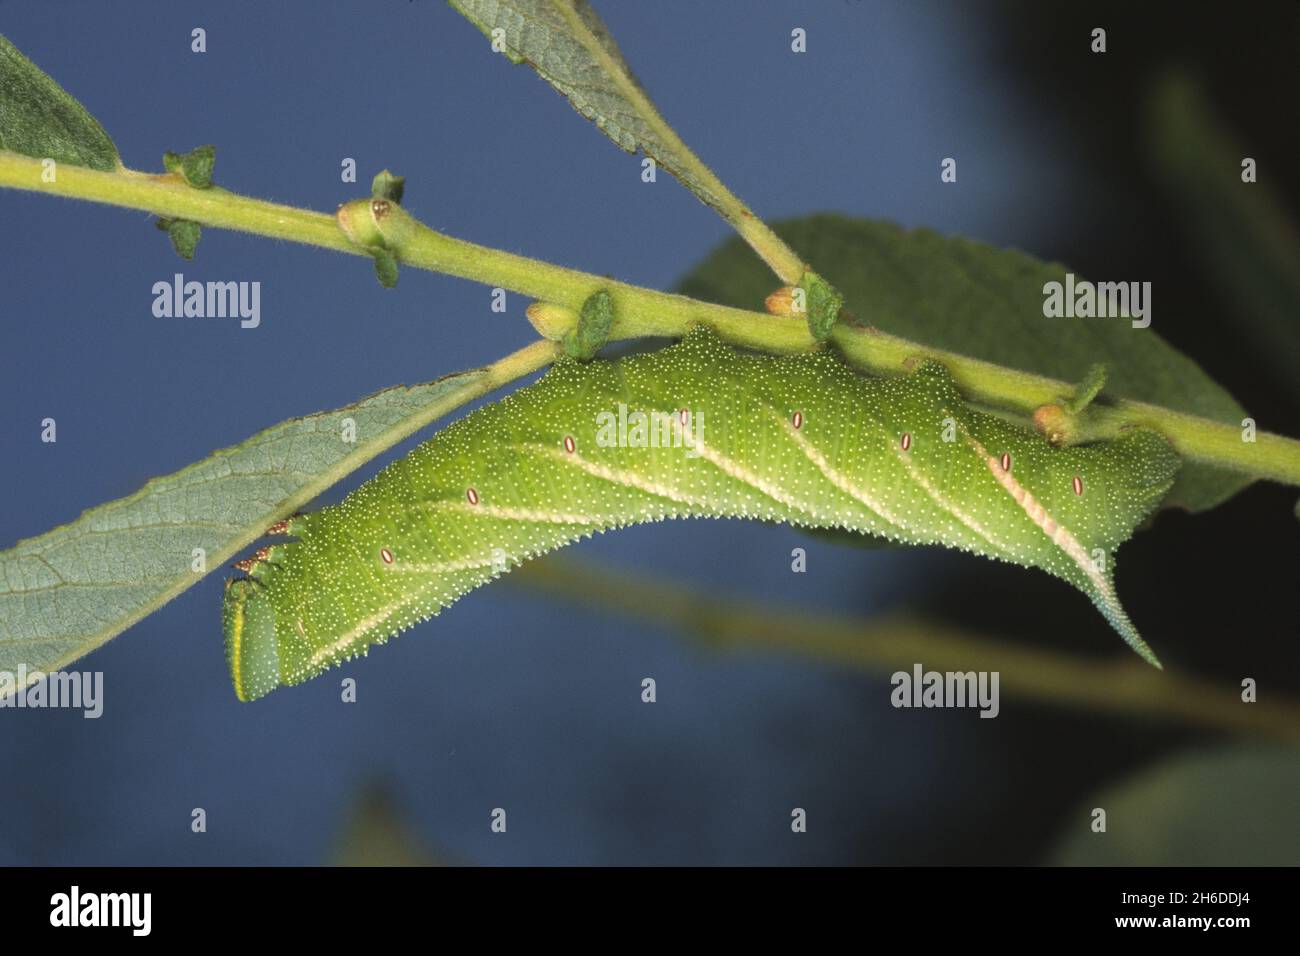 Eyed Hawk-Moth, Eyed Hawkmoth, Hawkmoths Hawk-moths (Smerinthus ocellata, Smerinthus ocellatus), caterpillar sitting headlong at a stem, side view , Stock Photo